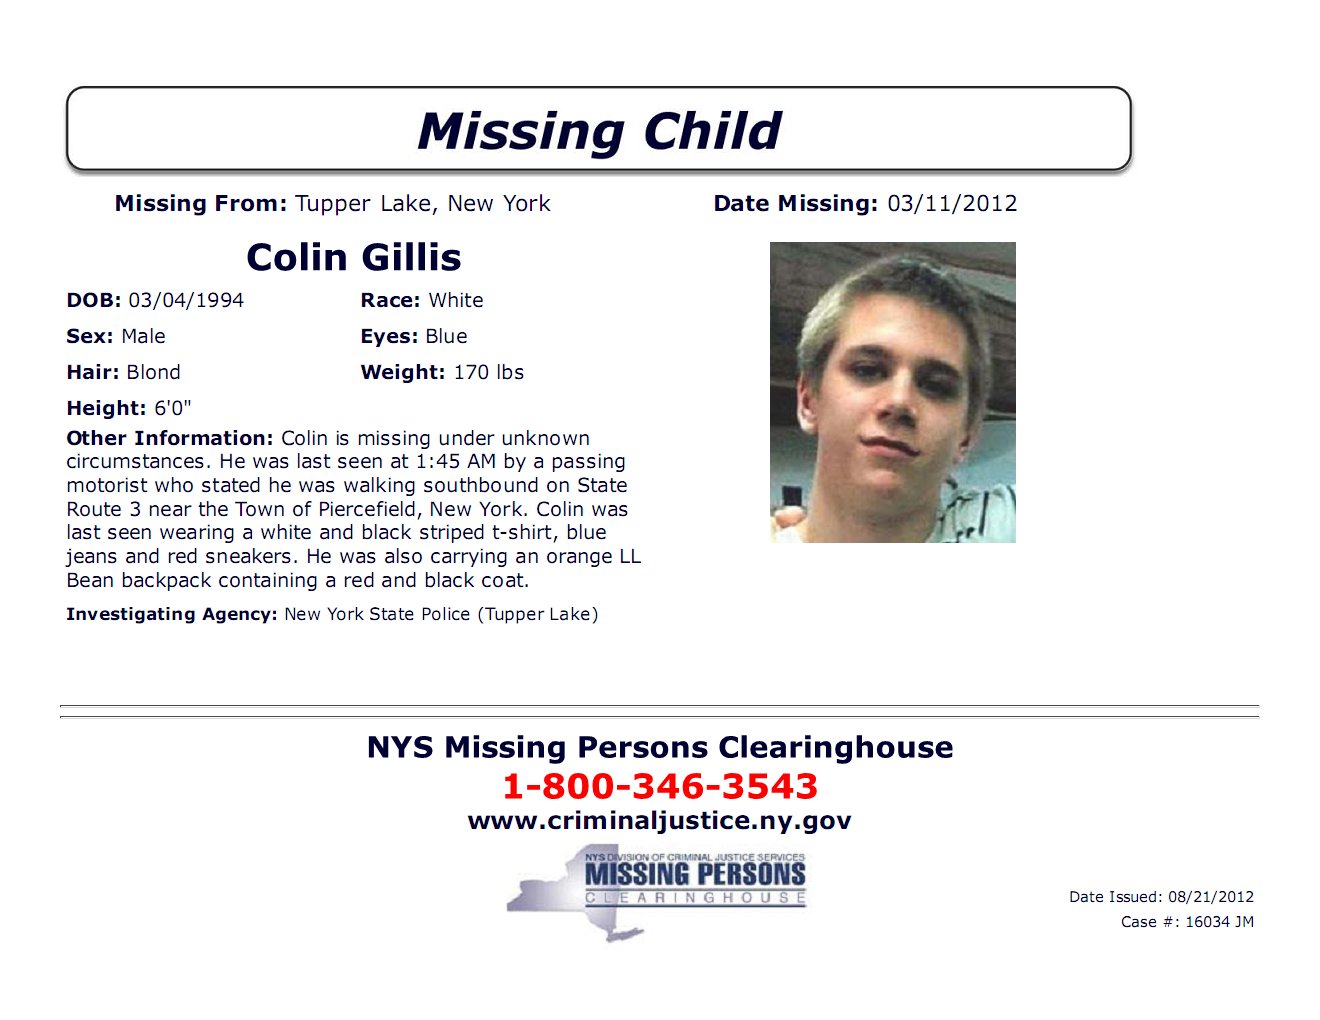 The New York State Police continue efforts in the search for Colin Gillis